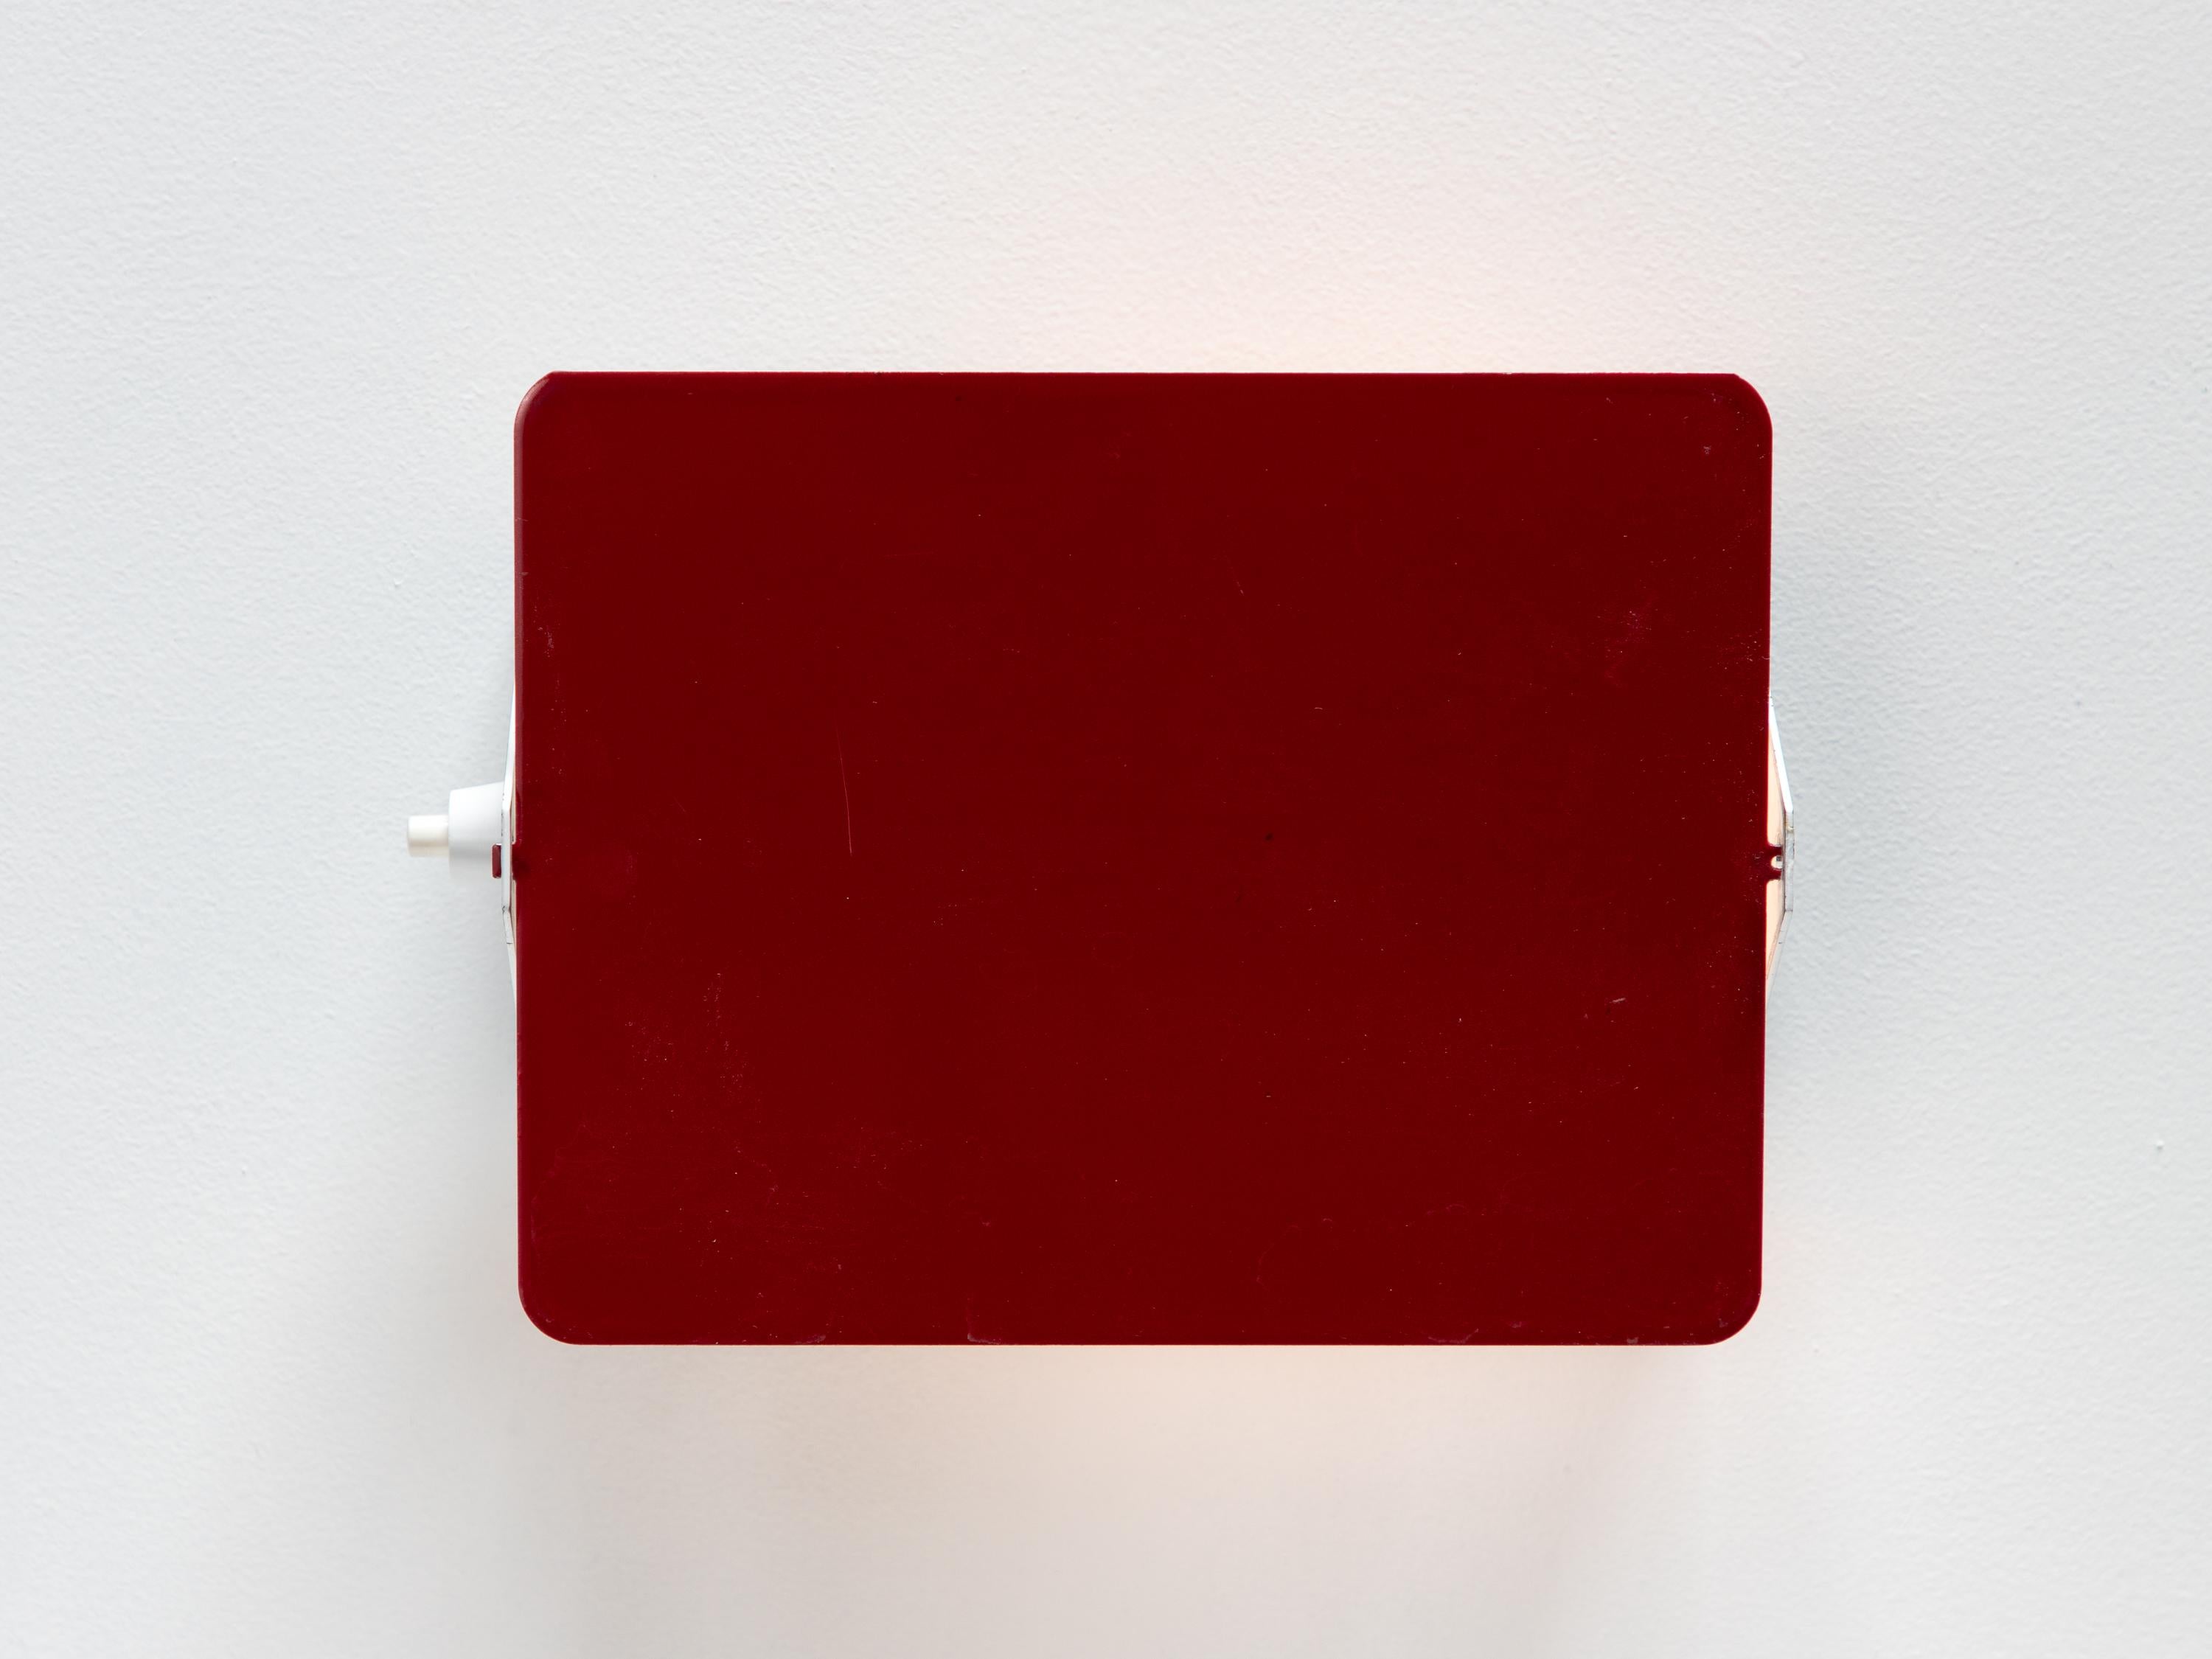 Aluminum Vintage Charlotte Perriand Les Arcs CP1 Wall Light or Sconces - Crimson Red For Sale